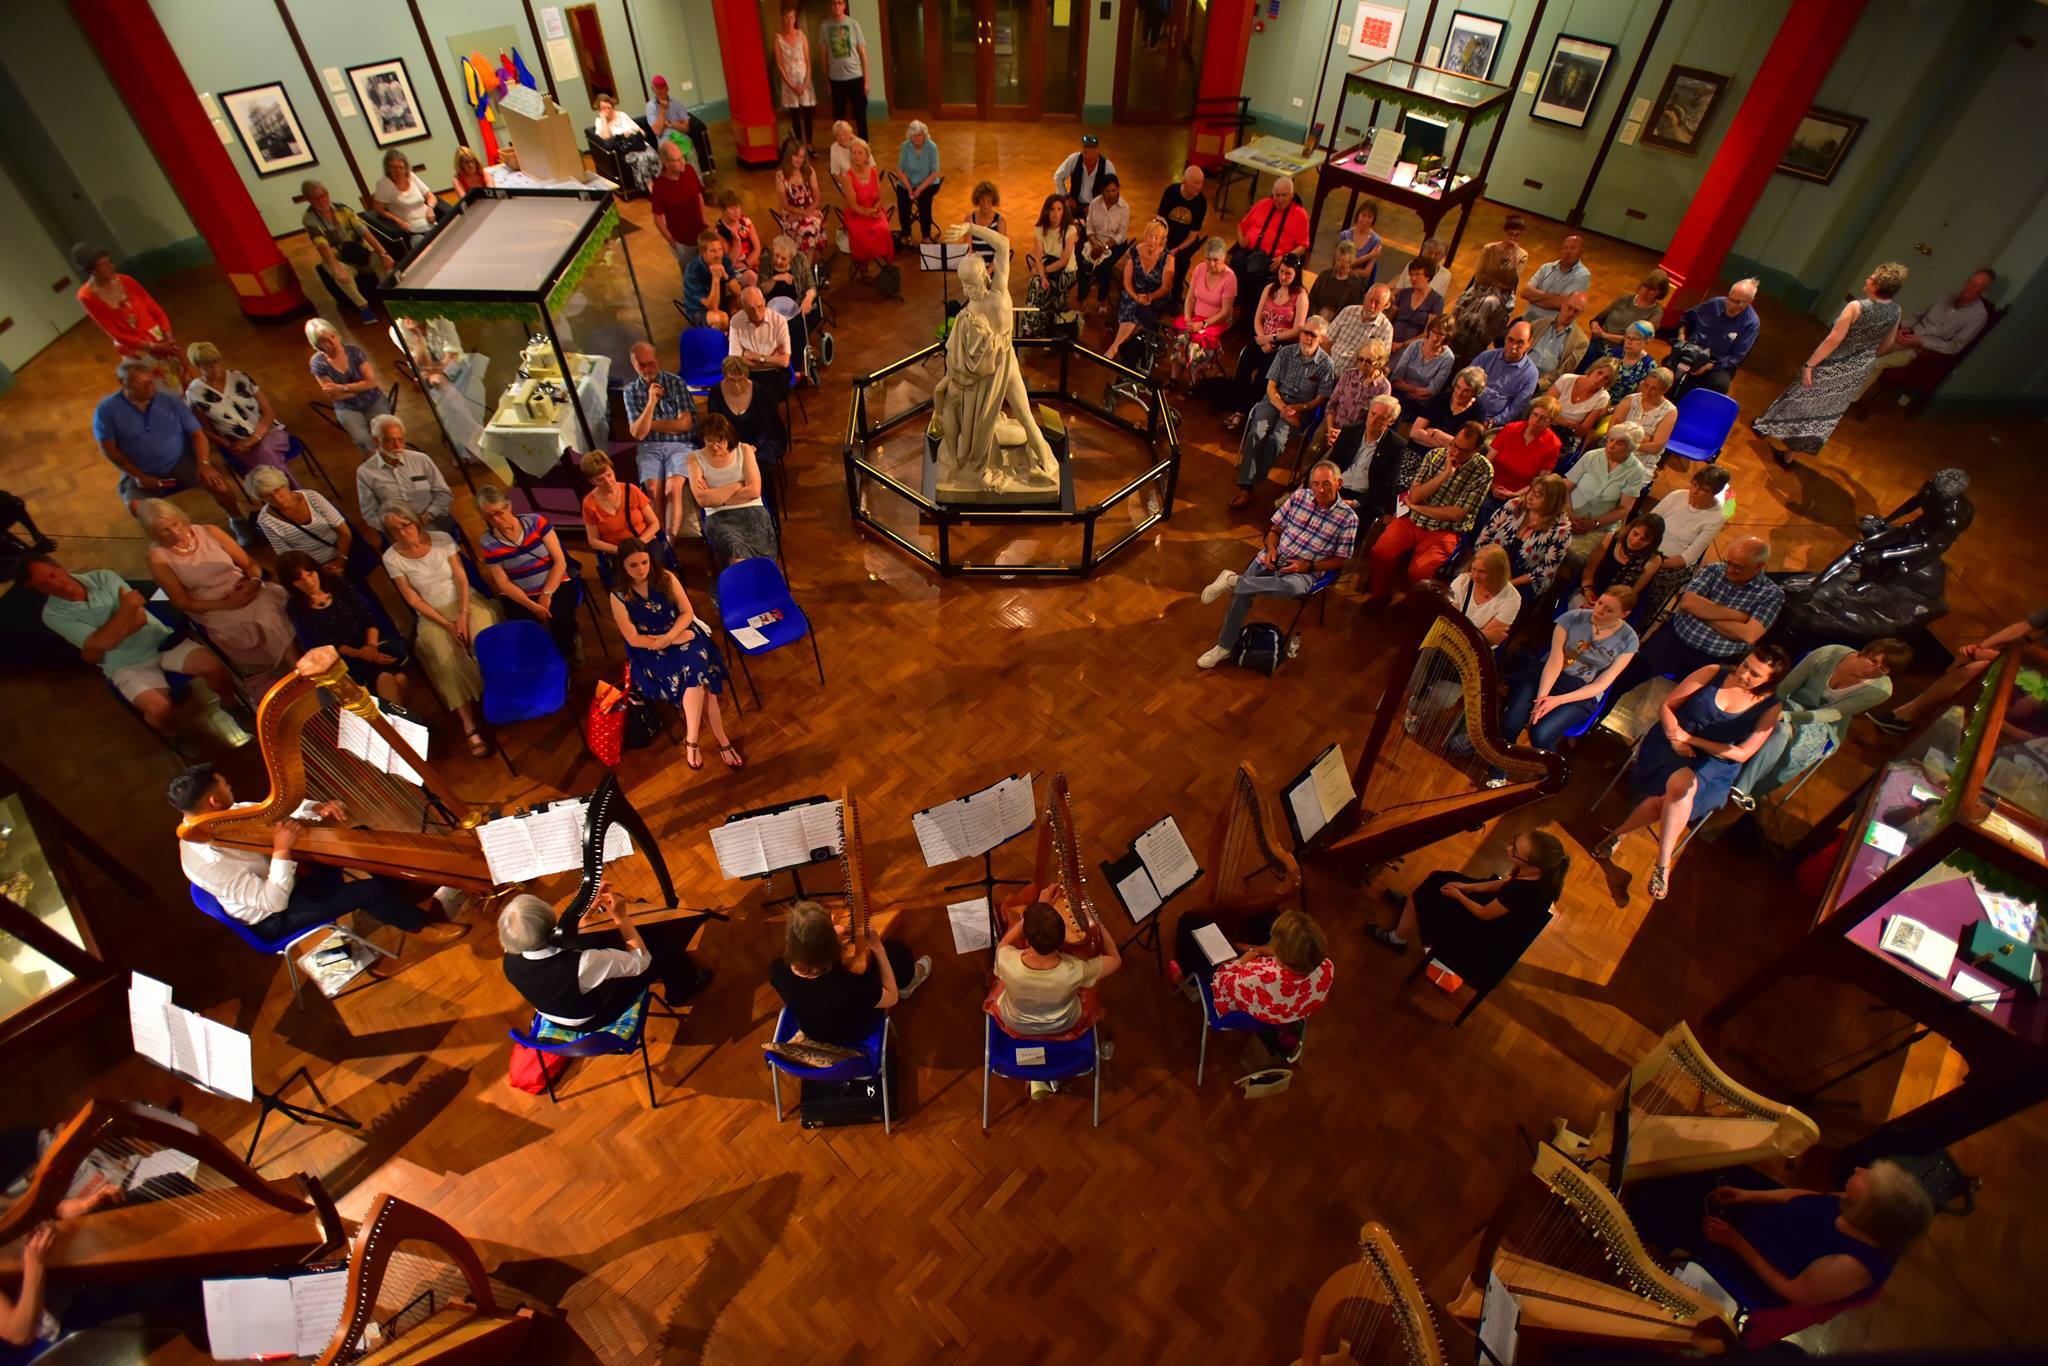 photograph of a concert by a group of harpists at Cliffe Castle Museum